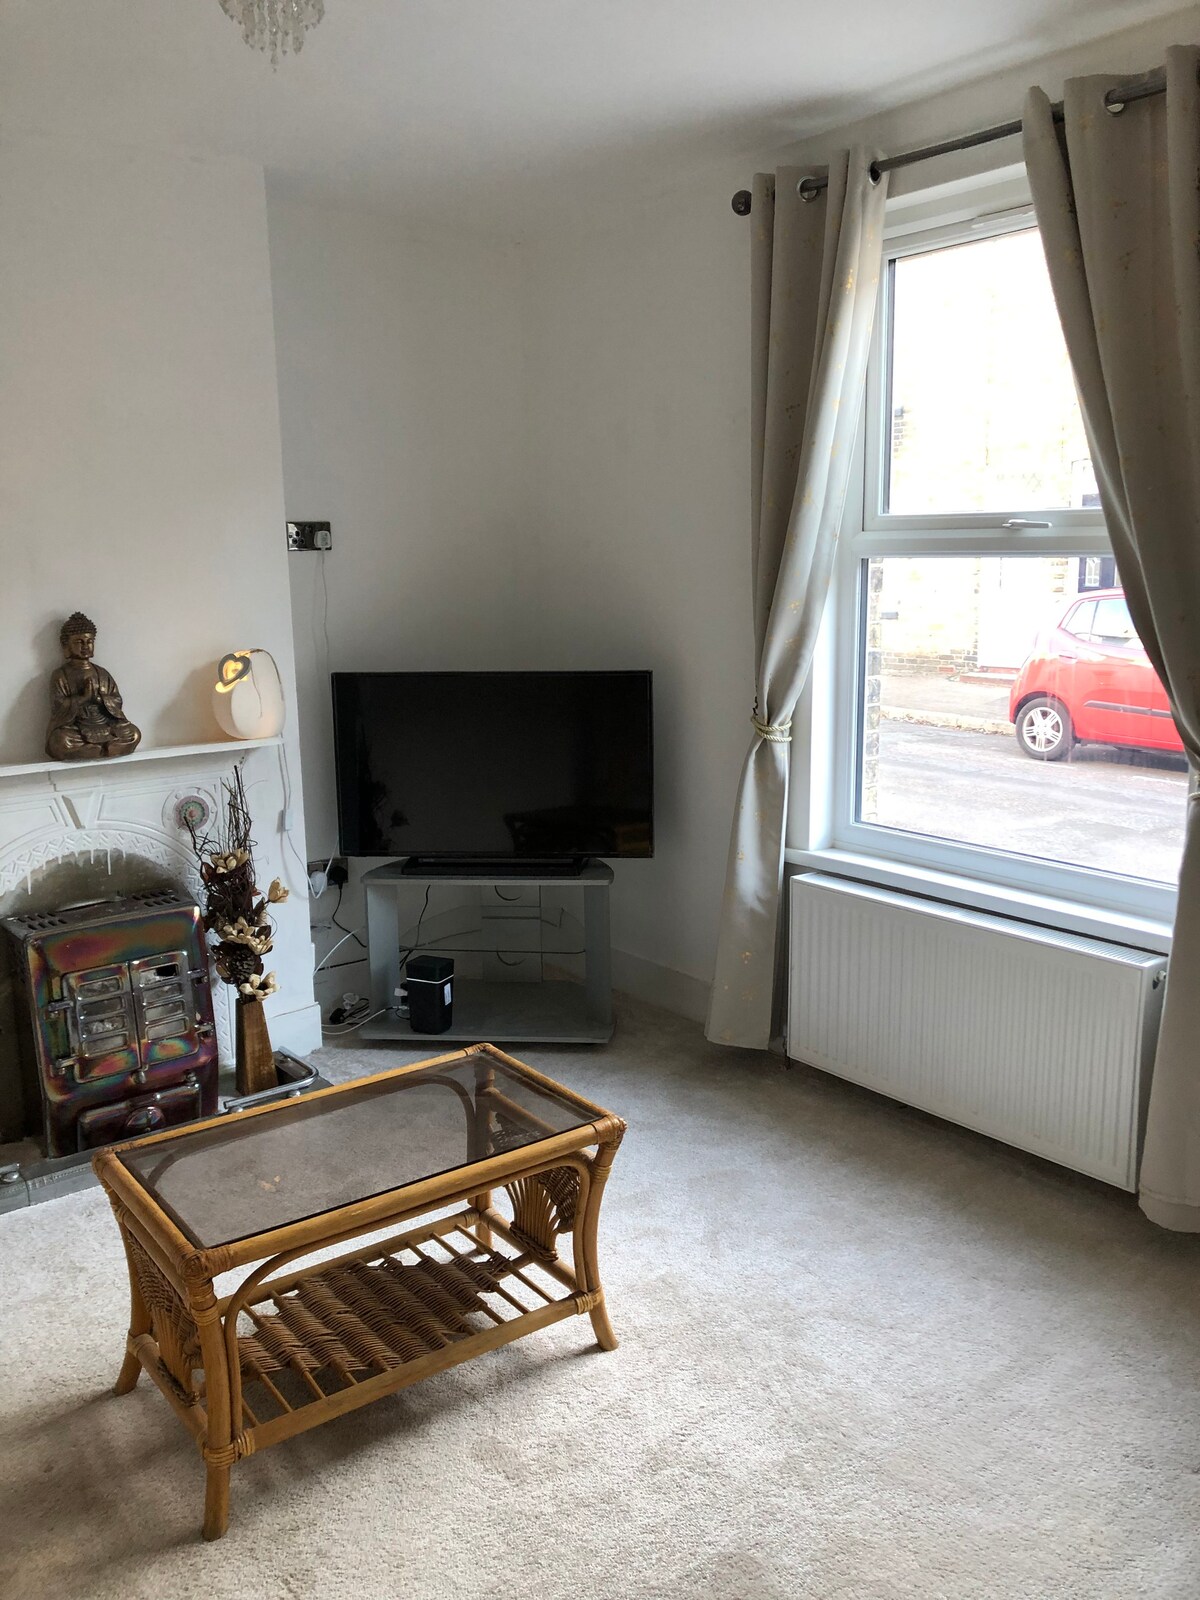 Two Bedroom End of Terrace House near High Street